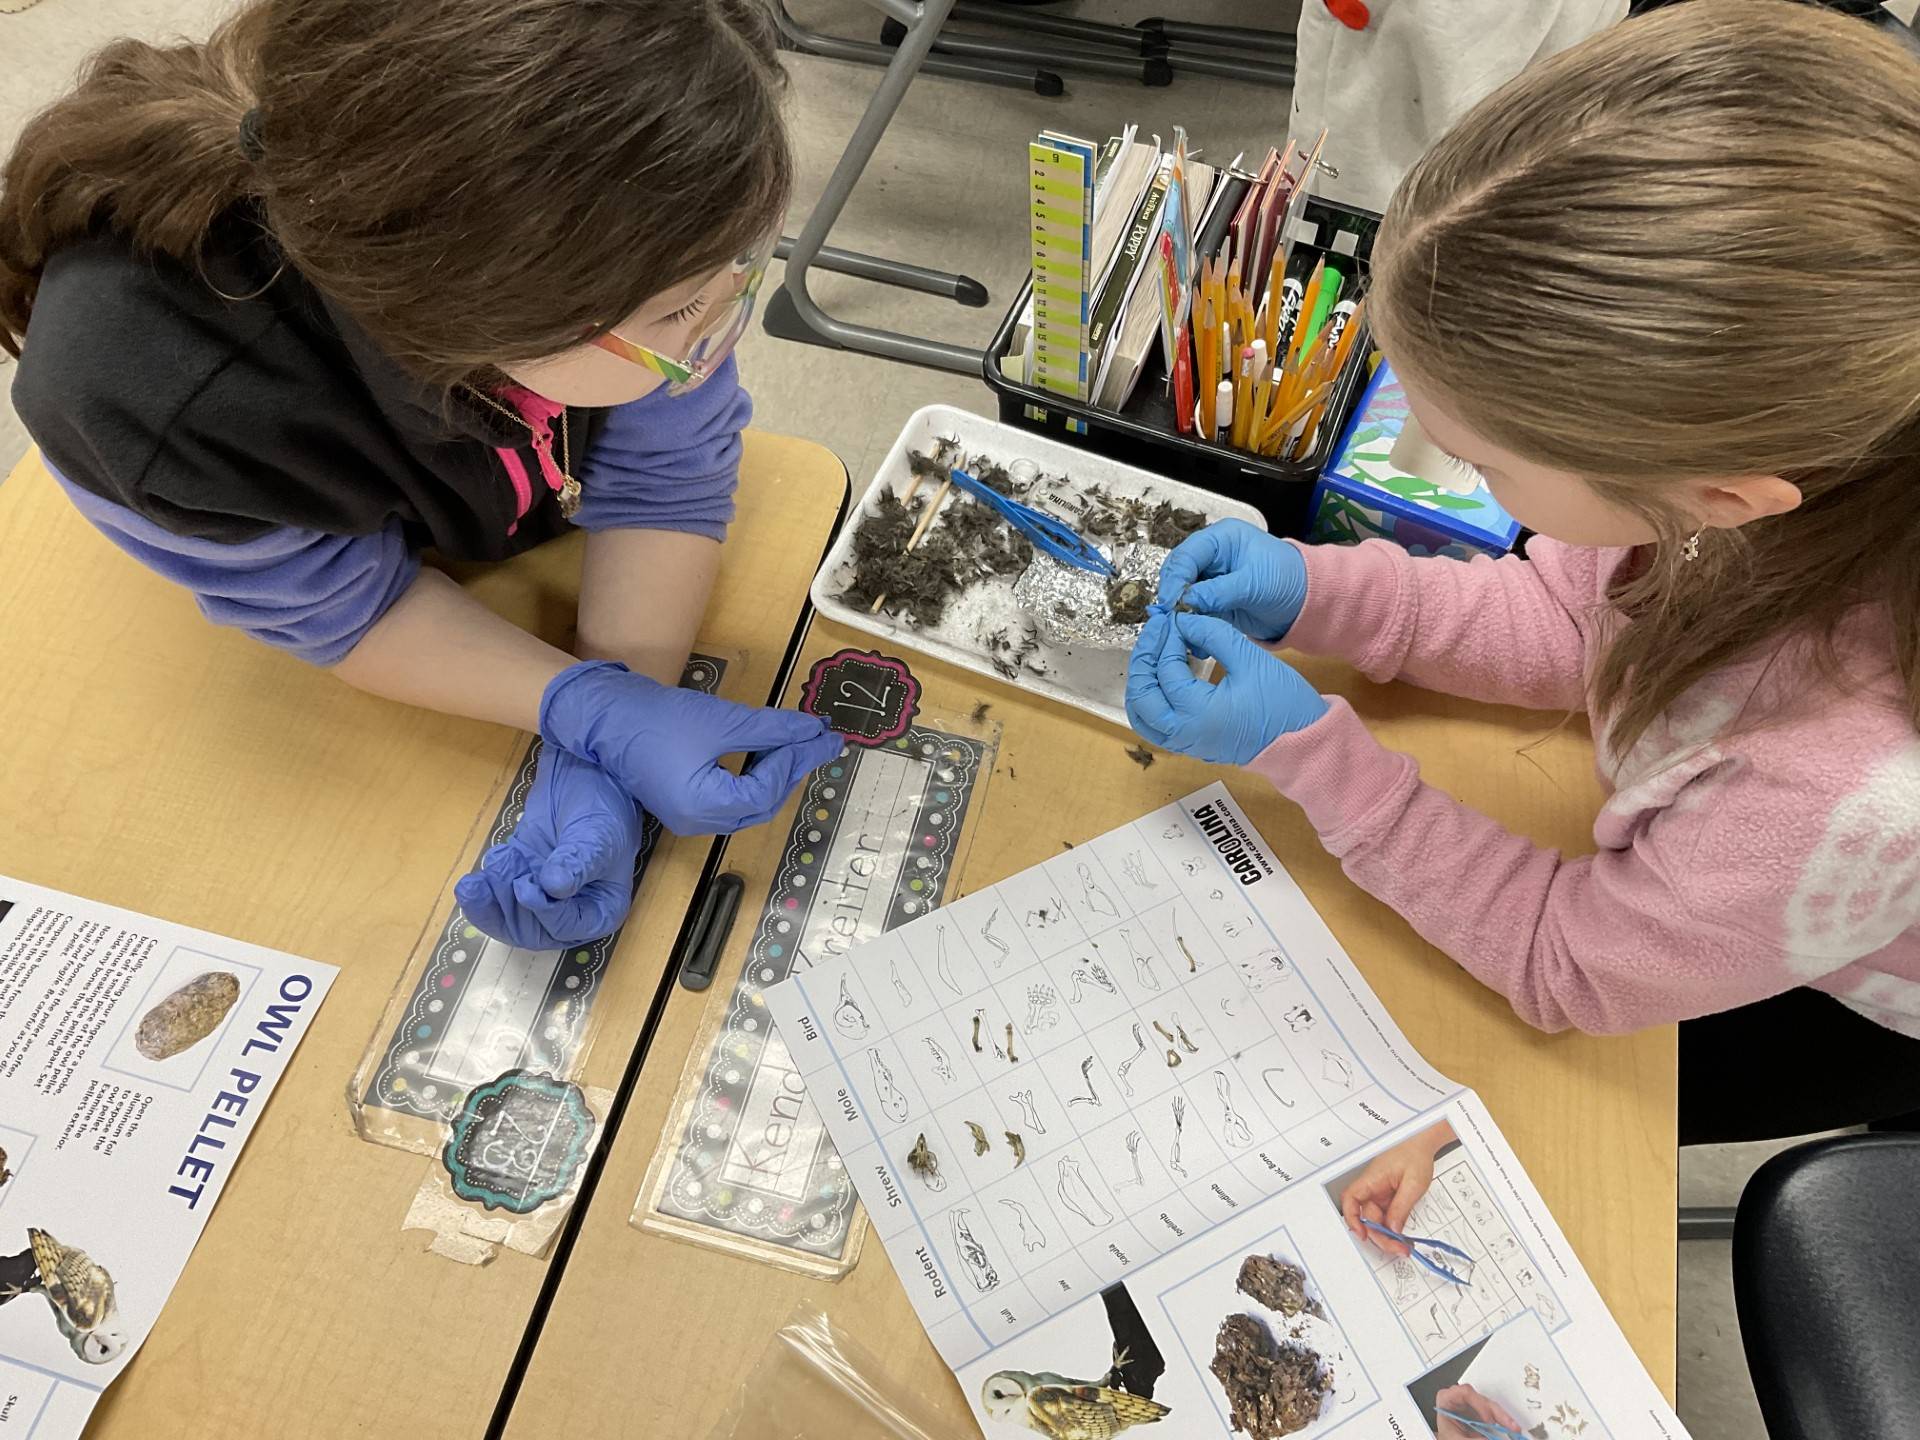 Third Graders exercised their skills as scientists in a two-day project on owls